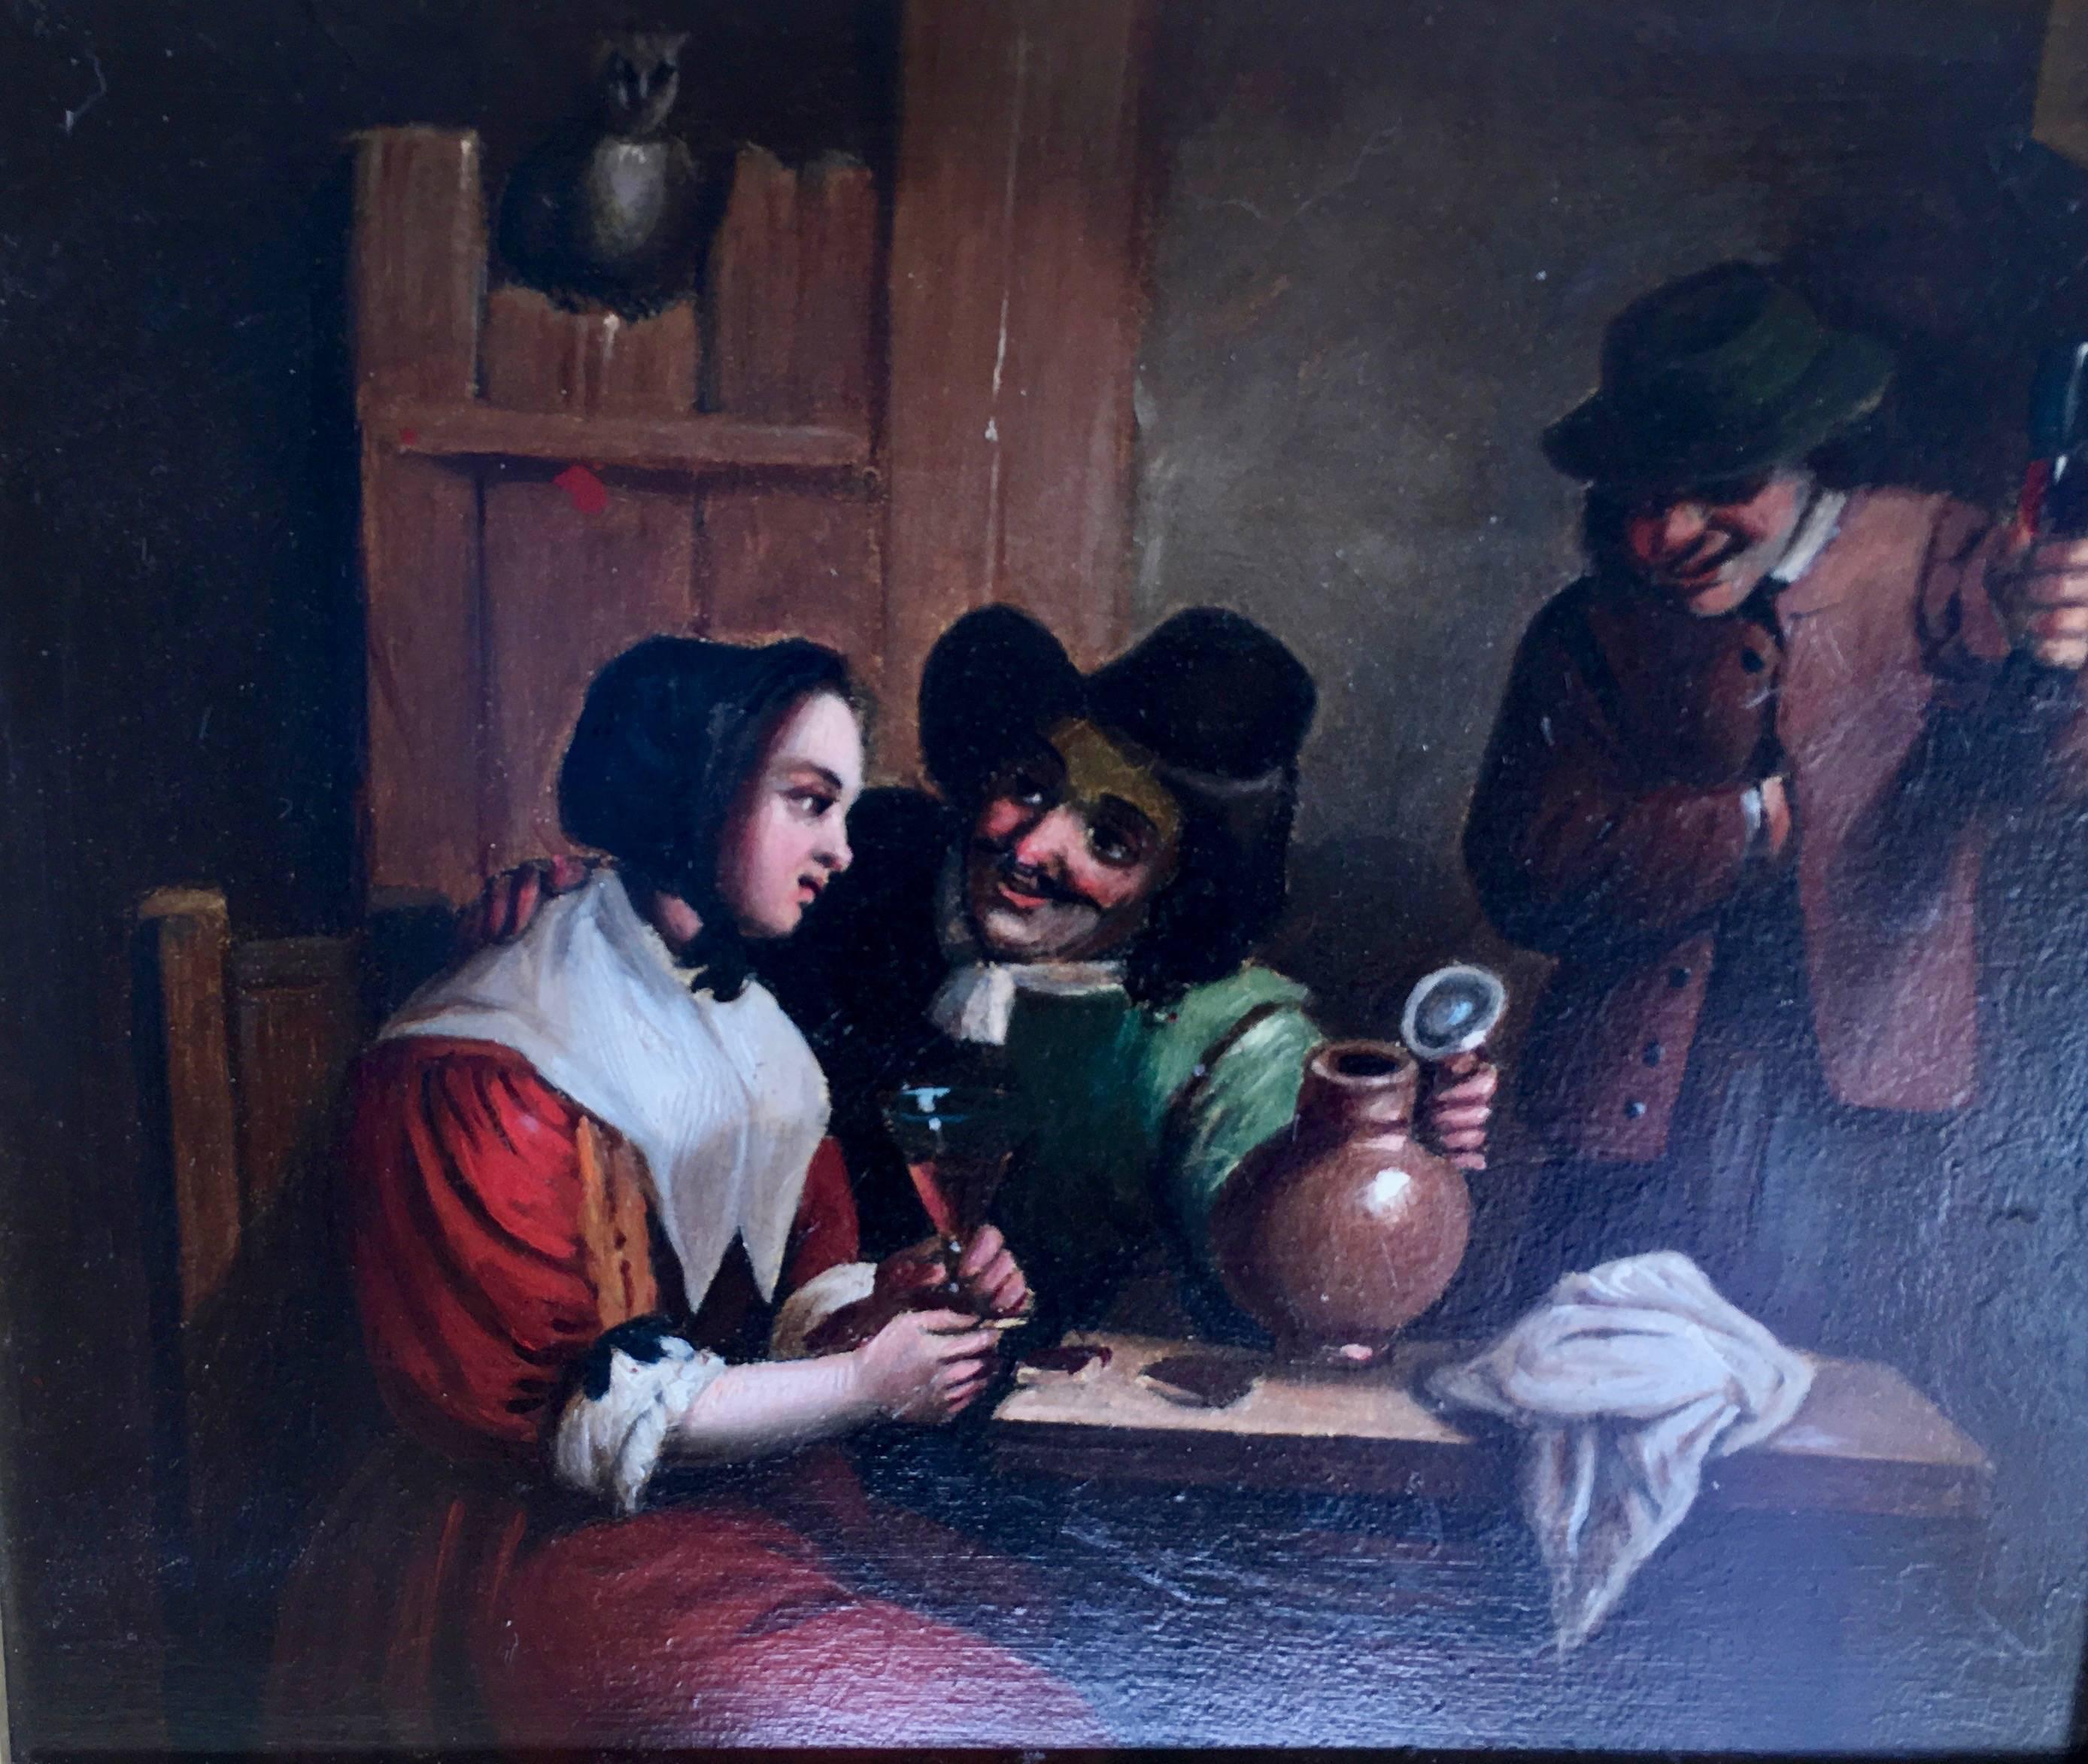 17th century style Dutch figures in an Inn drinking at a table - Painting by Unknown